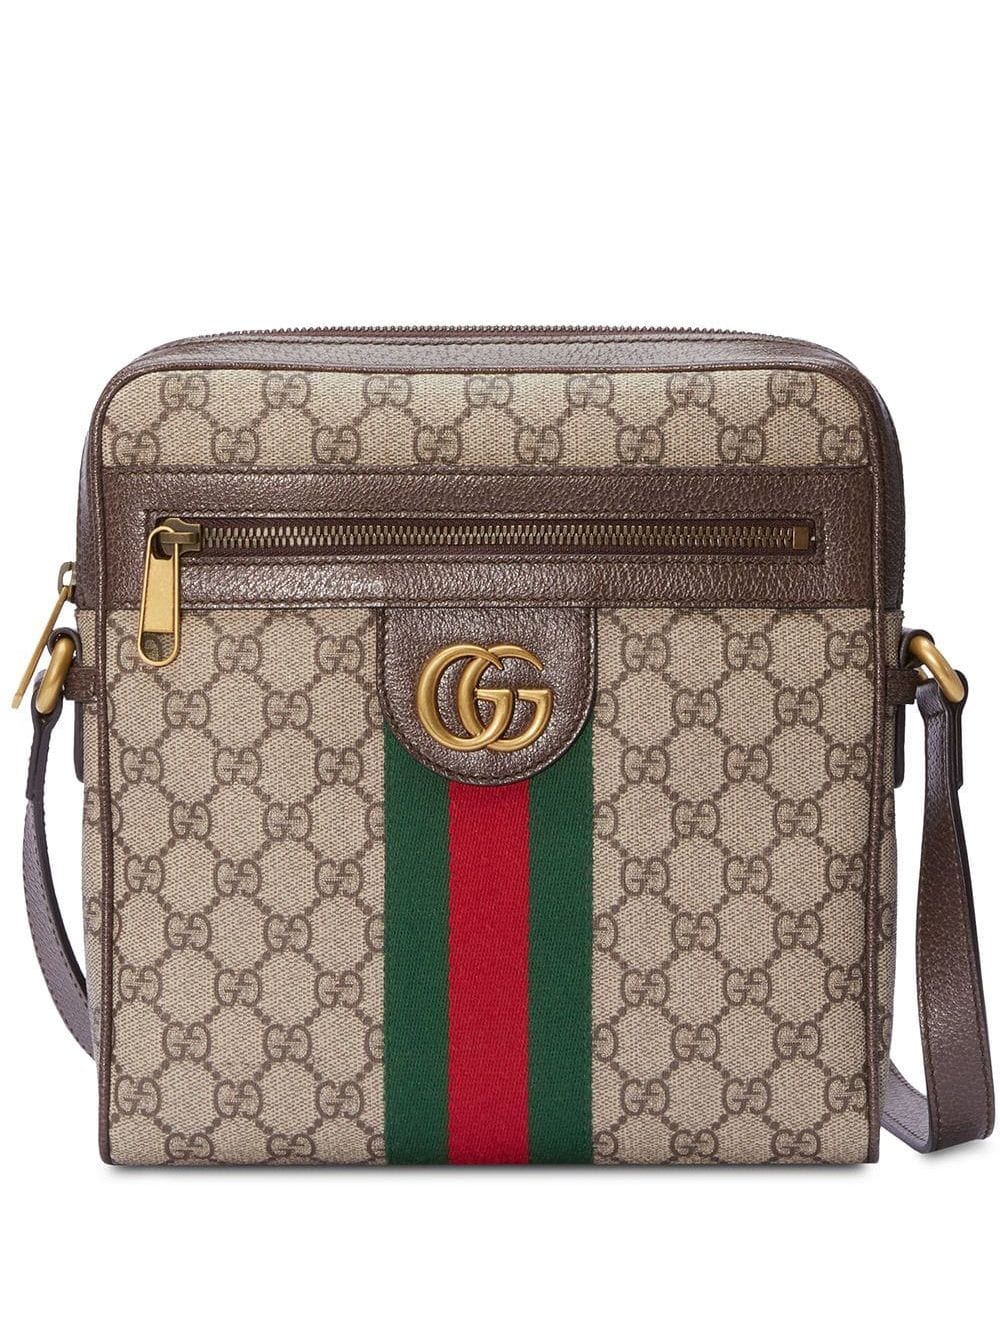 Beige Leather Crossbody Bag with Gucci-Web Detail